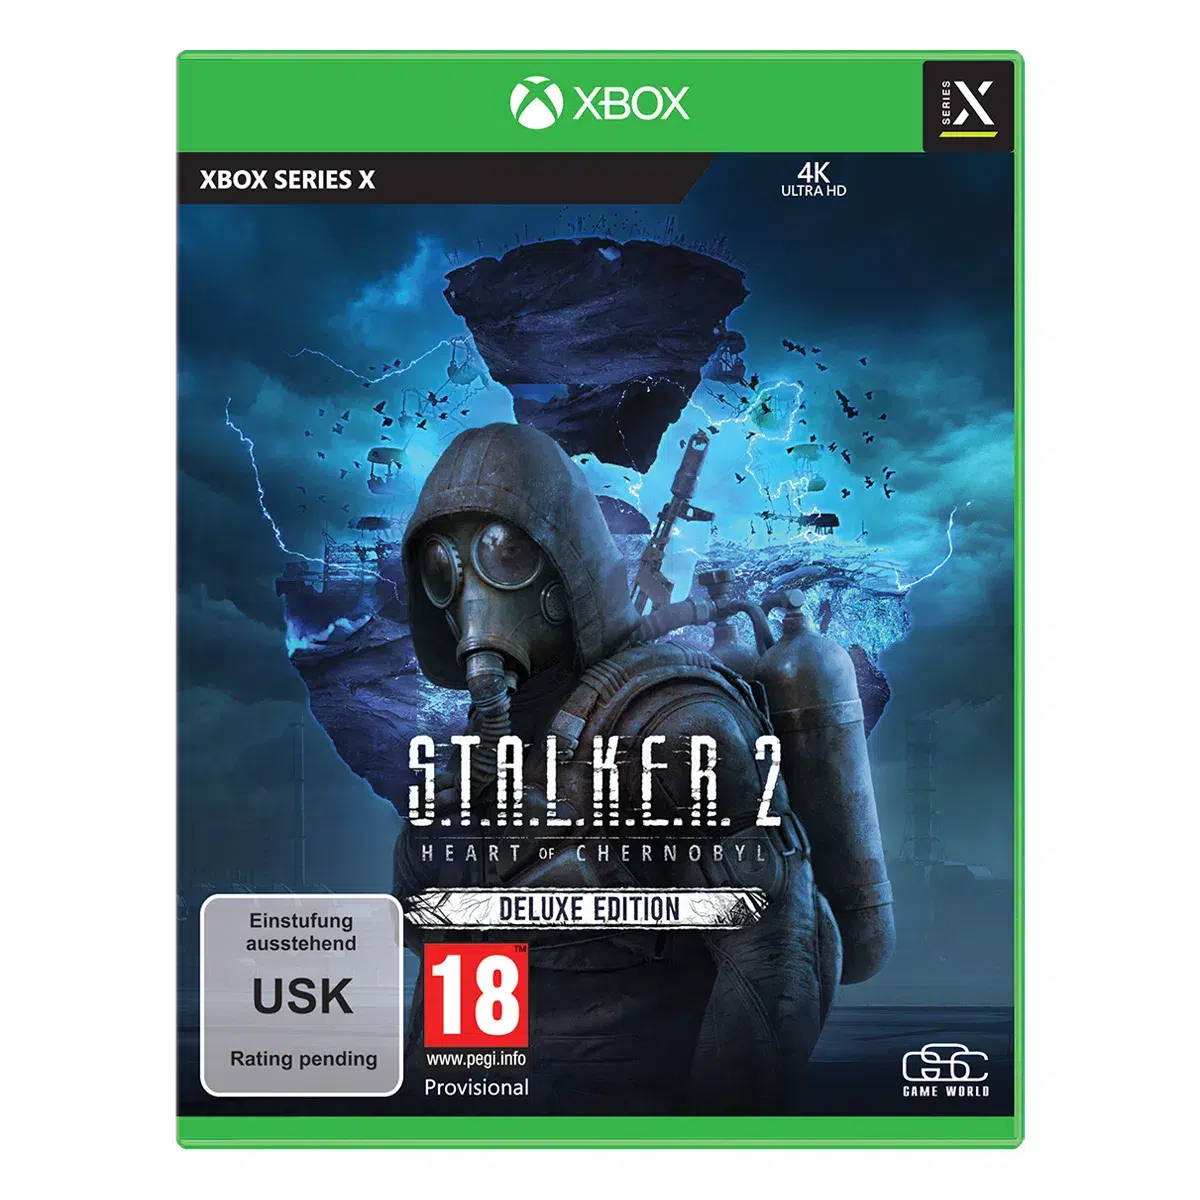 S.T.A.L.K.E.R. 2 Heart of Chornobyl Collector's Edition (XSRX) (INT)